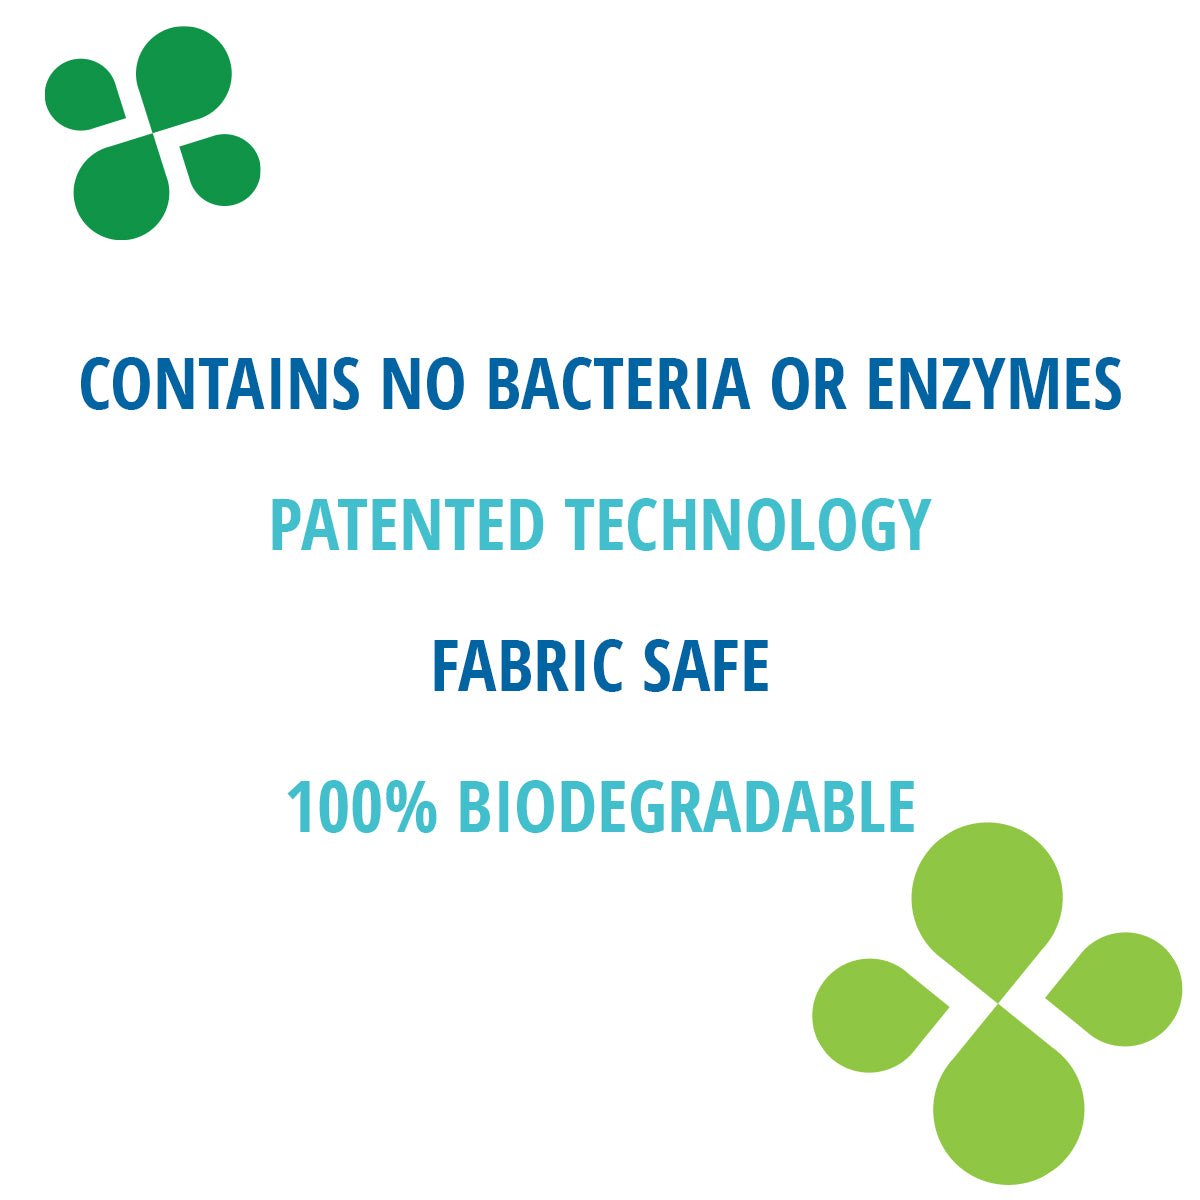 ProBio® Odor Out - Urine Odor Remover contains no bacteria or enzymes, patented technology, fabric safe, and 100% biodegradable.